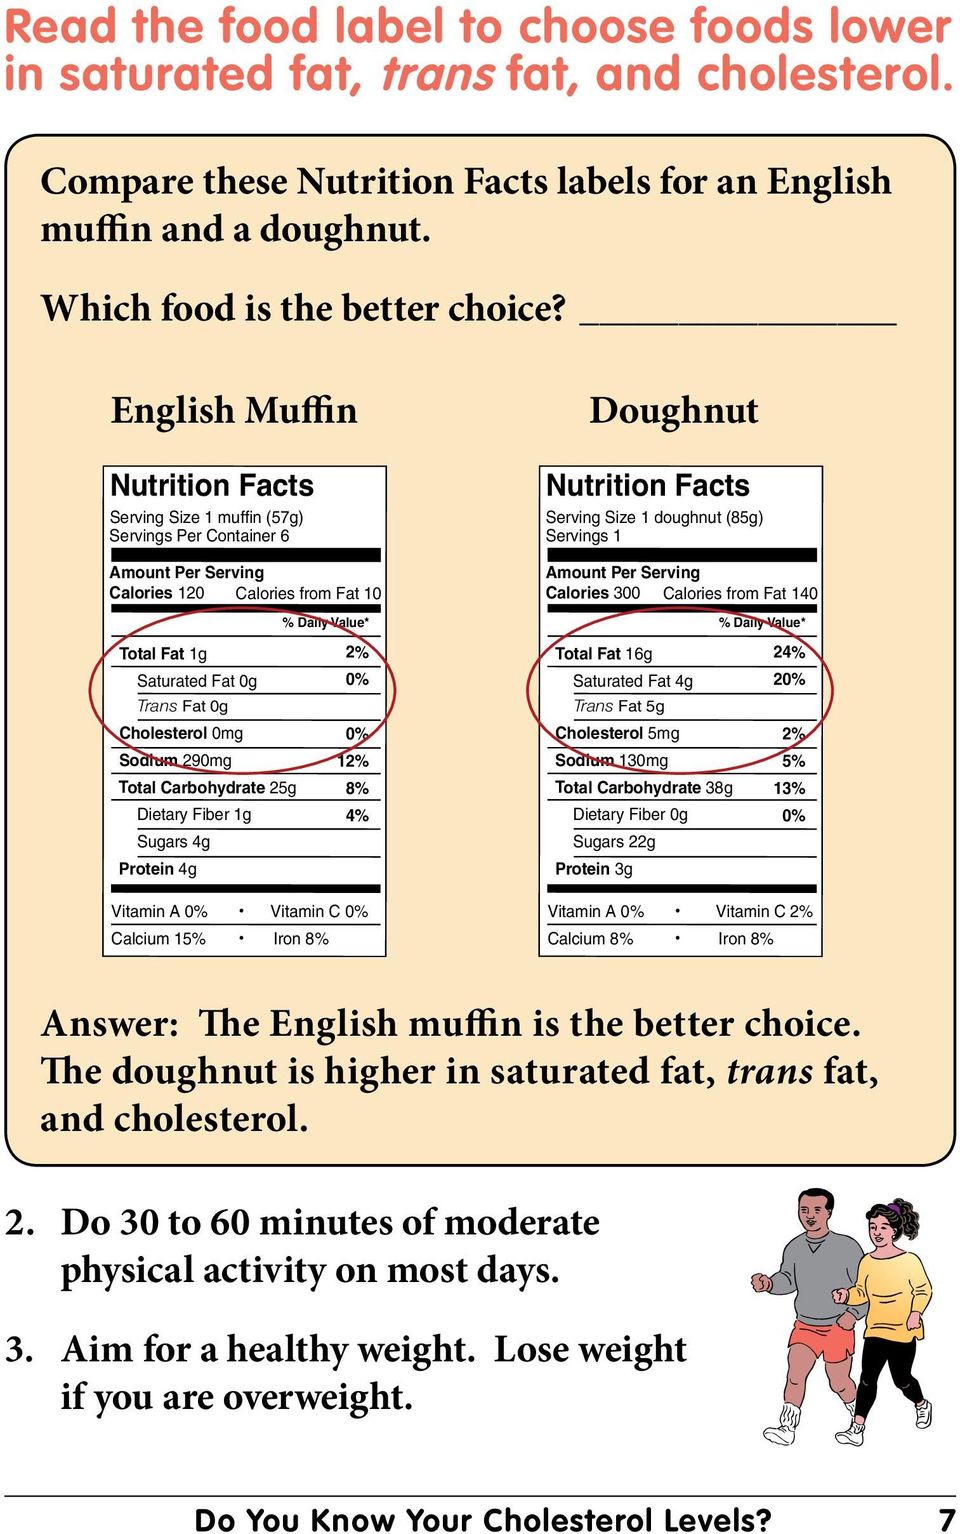 doughnut (85g) Servings 1 Amount Per Serving Calories 300 Calories from Fat 140 % Daily Value* Total Fat 1g Saturated Fat 0g Trans Fat 0g Cholesterol 0mg Sodium 290mg Total Carbohydrate 25g Dietary